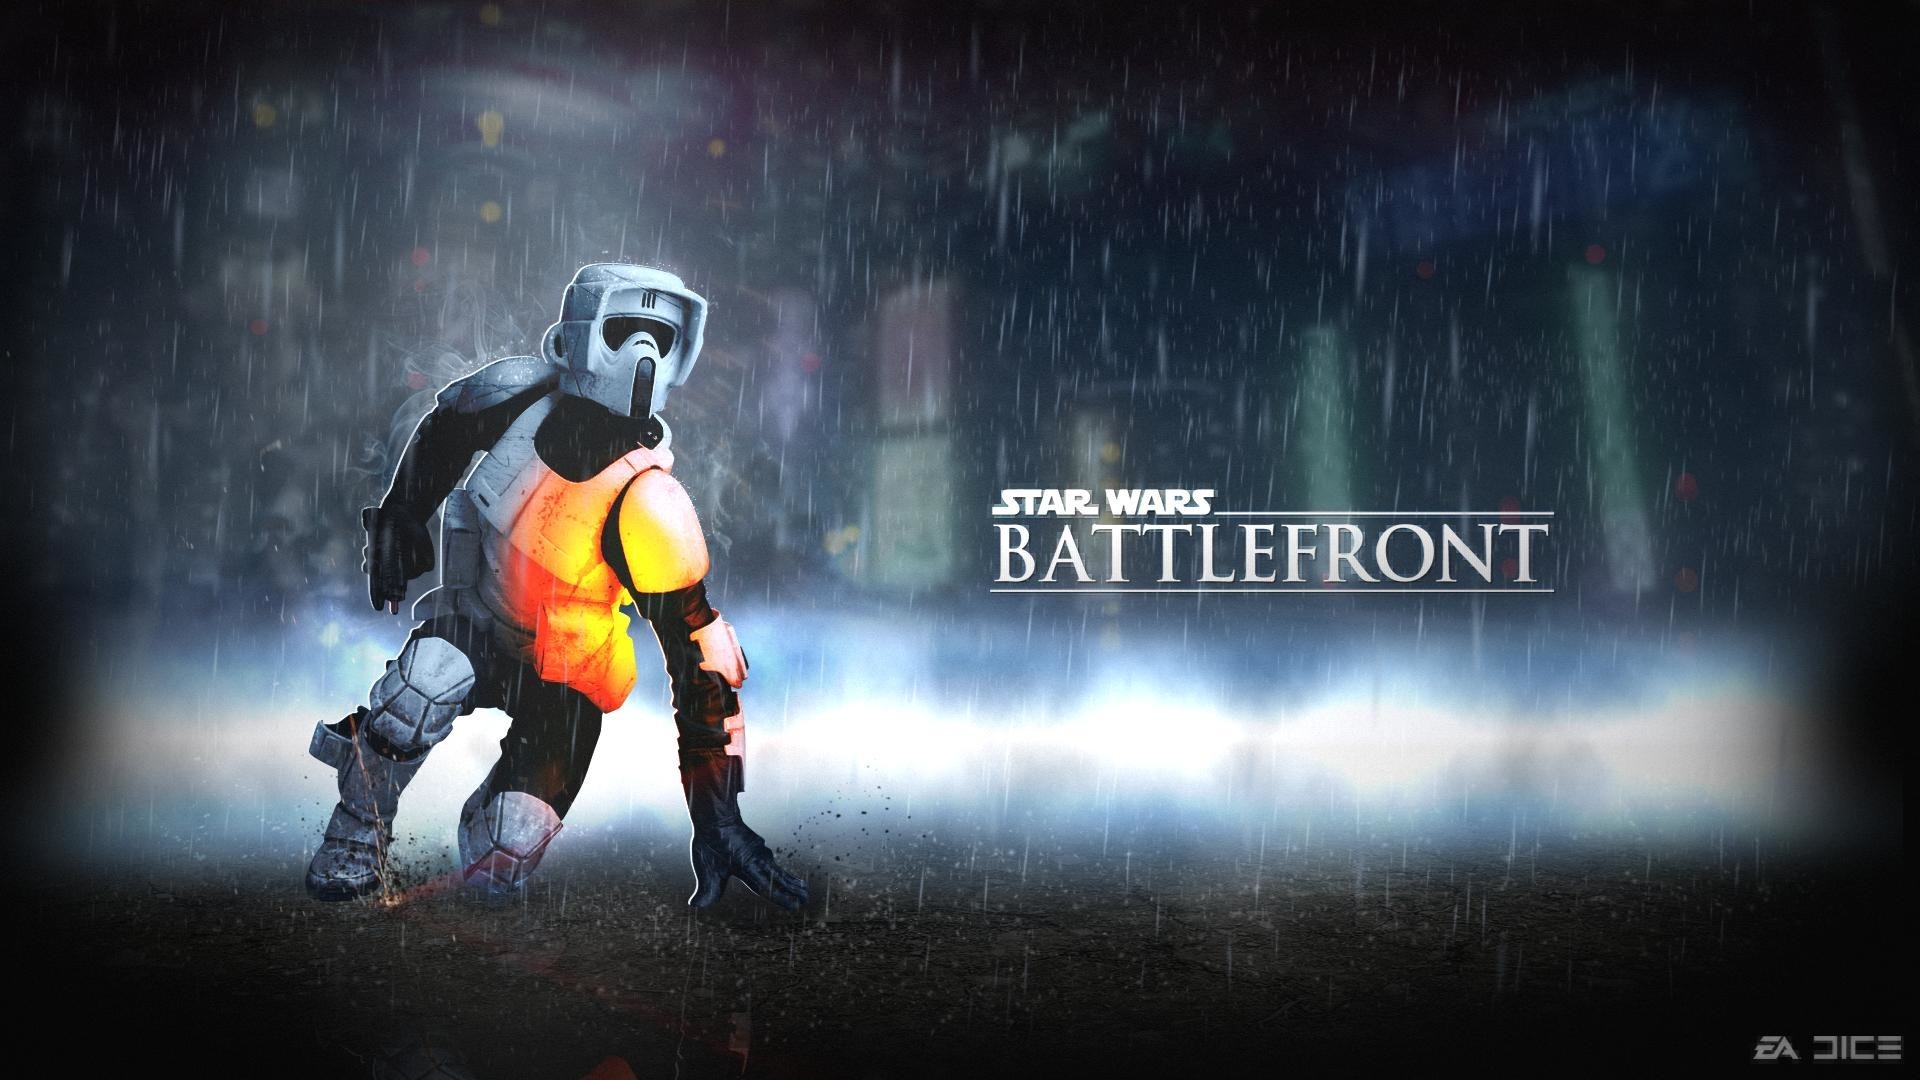 1920x1080  Star Wars Battlefront wallpaper I put together, in the style of  Battlefield.